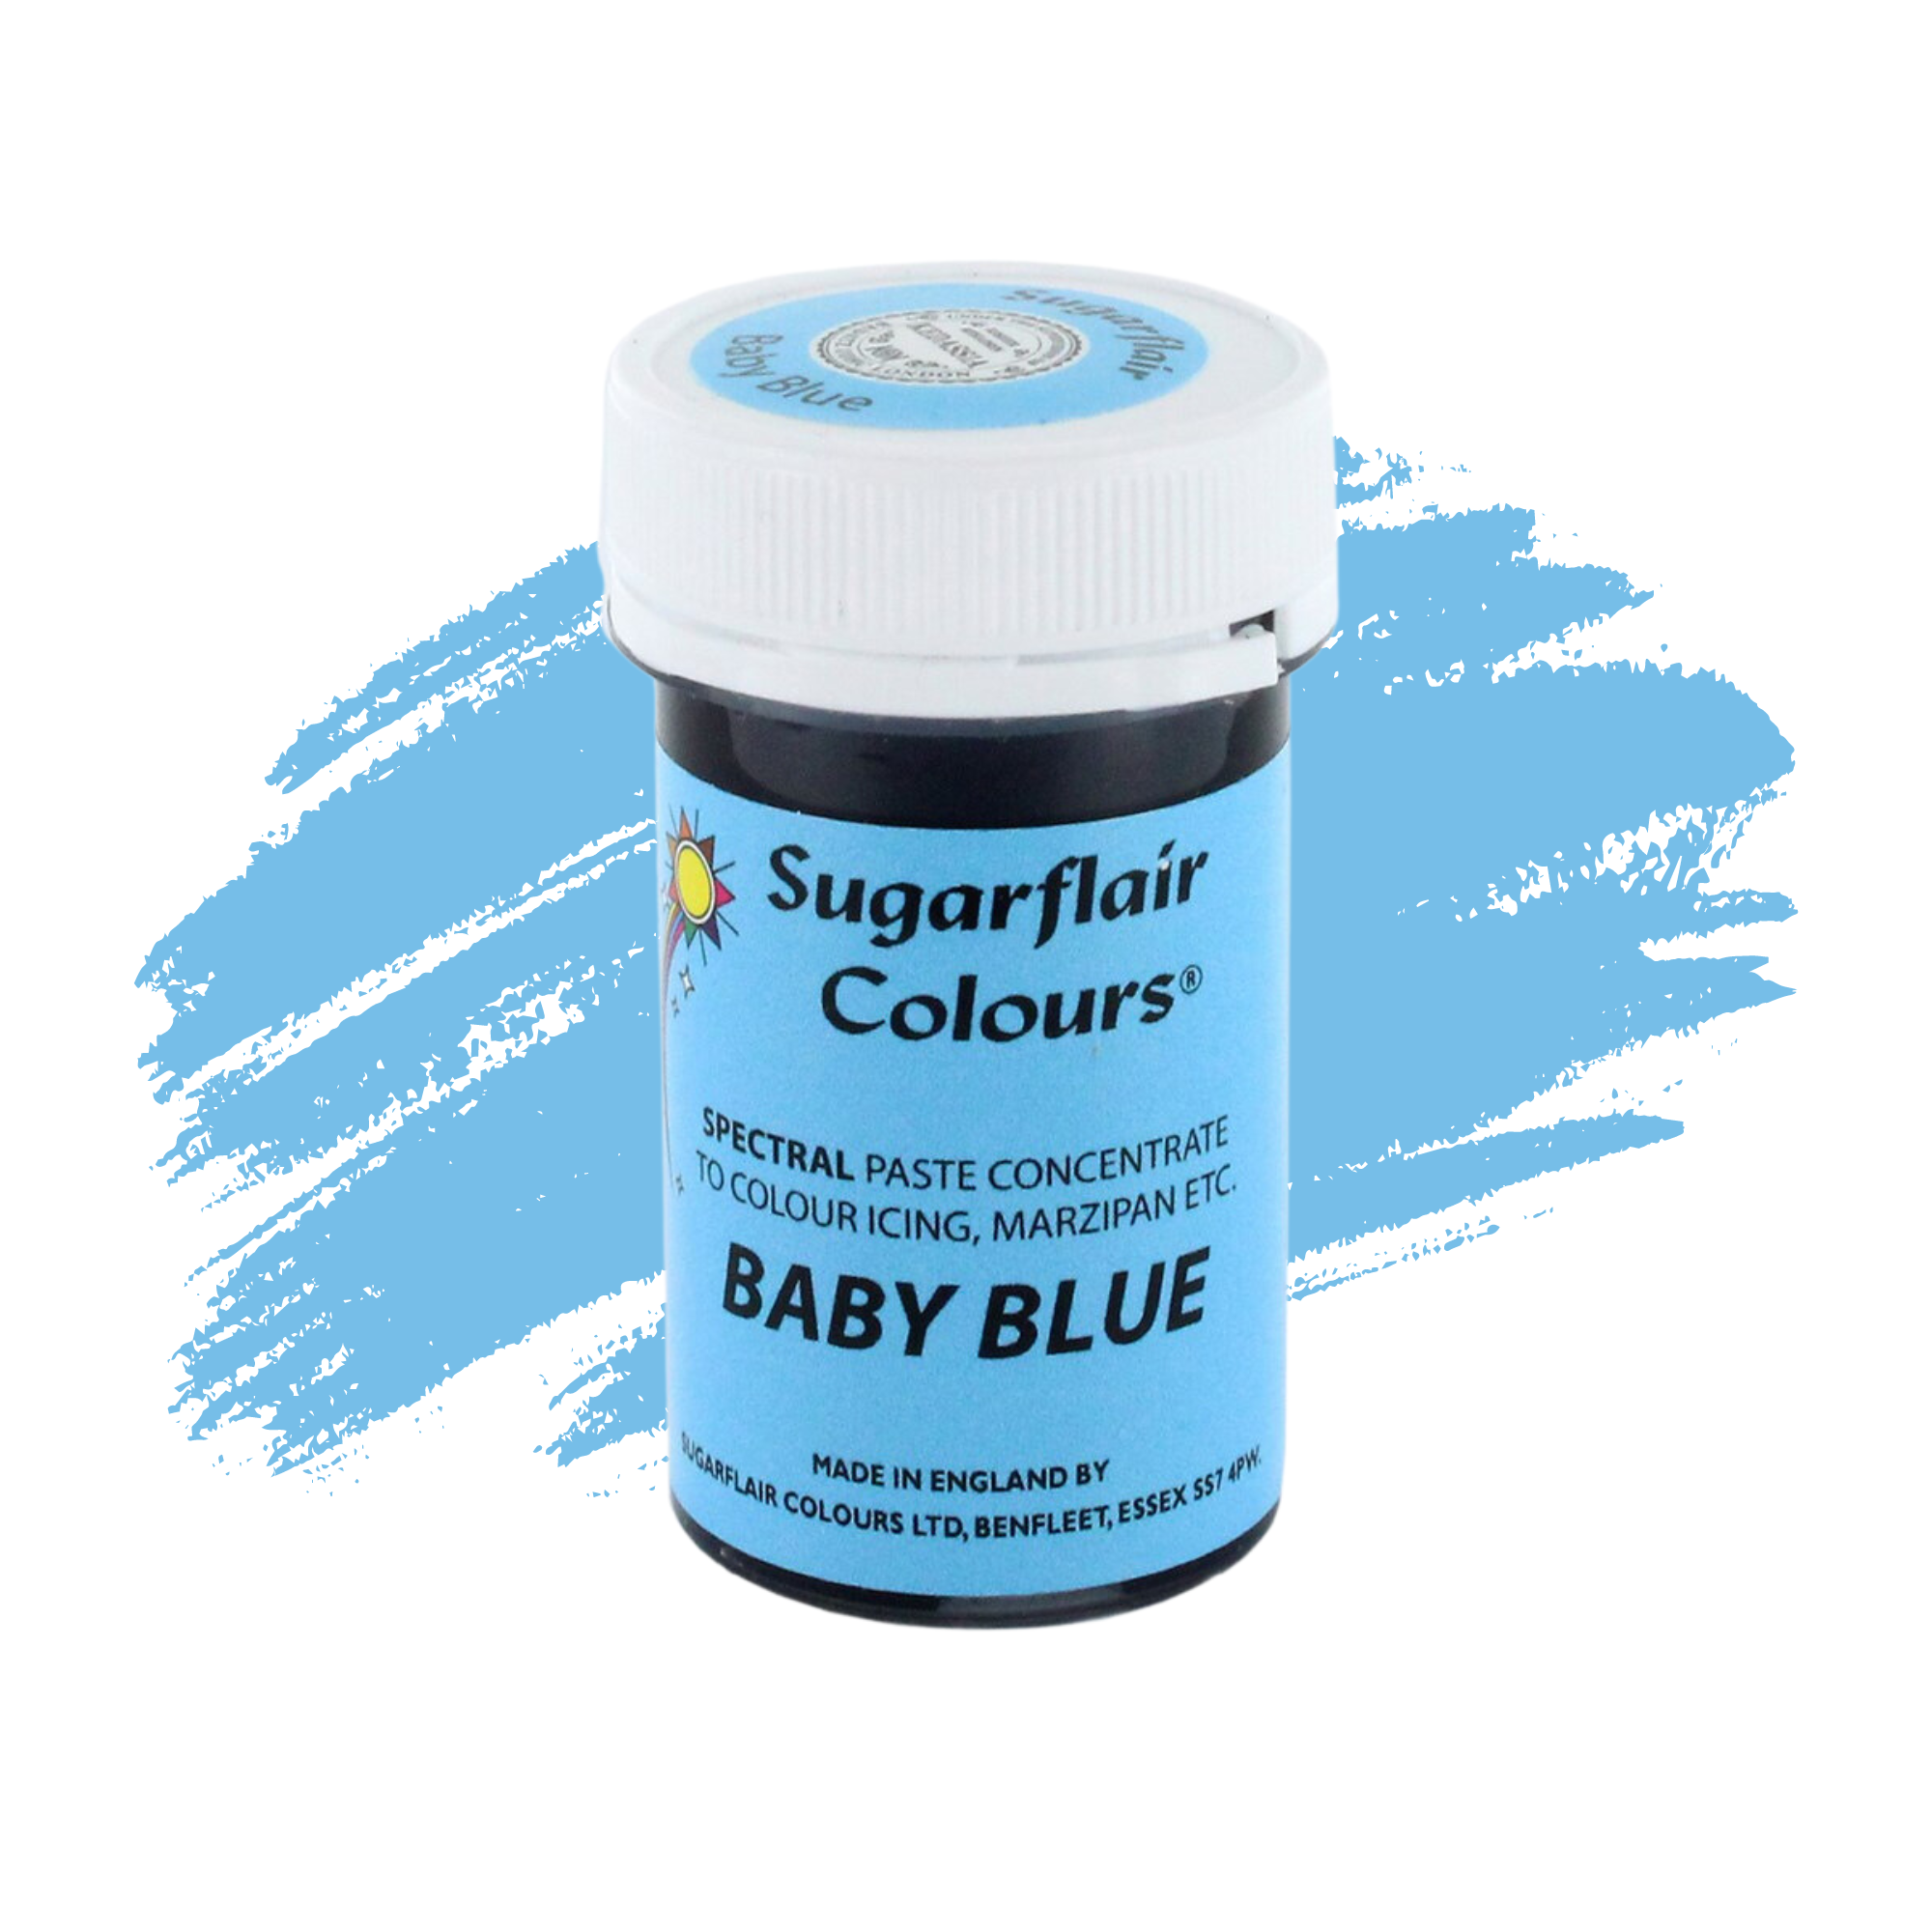 Sugarflair Paste Colours Concentrated Food Colouring - Spectral Baby Blue - 25g